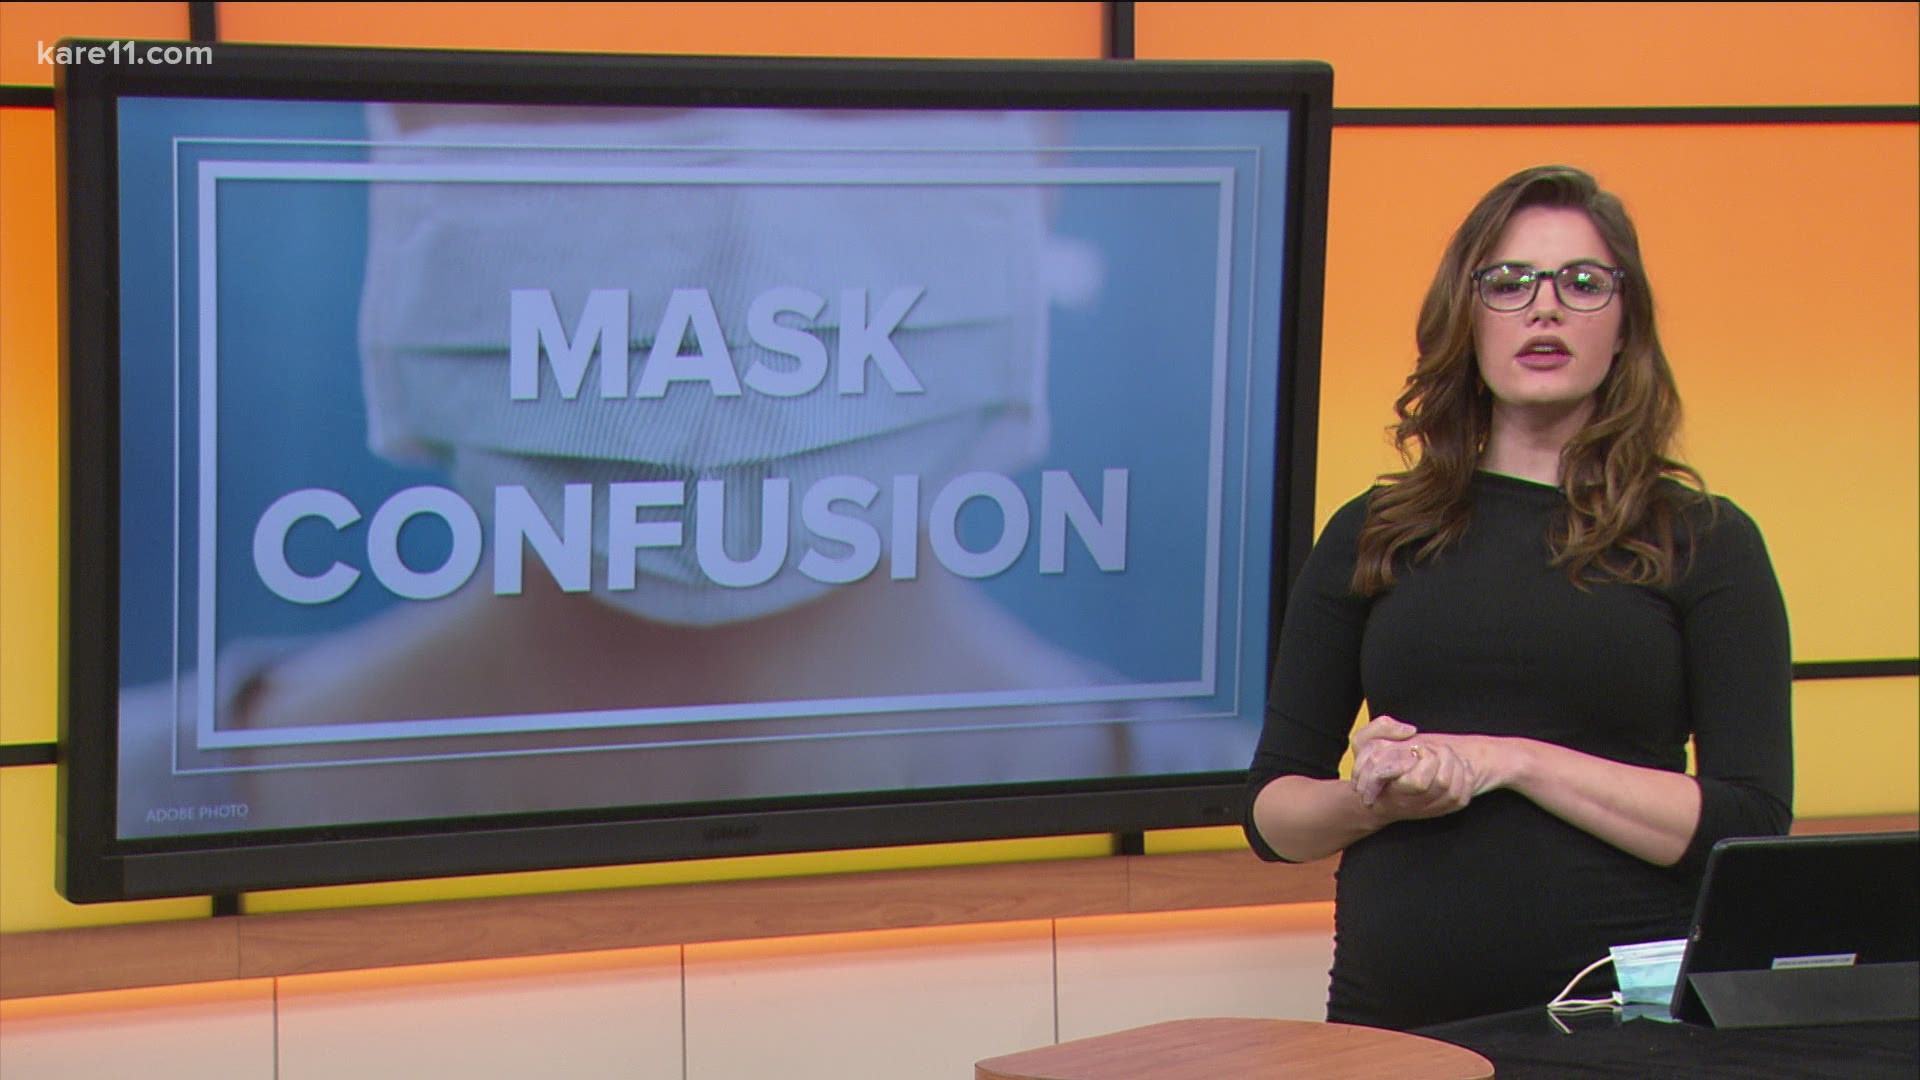 The CDC director says the decision to lift the mask mandate was based in science. Some businesses have stopped requiring masks inside in response.